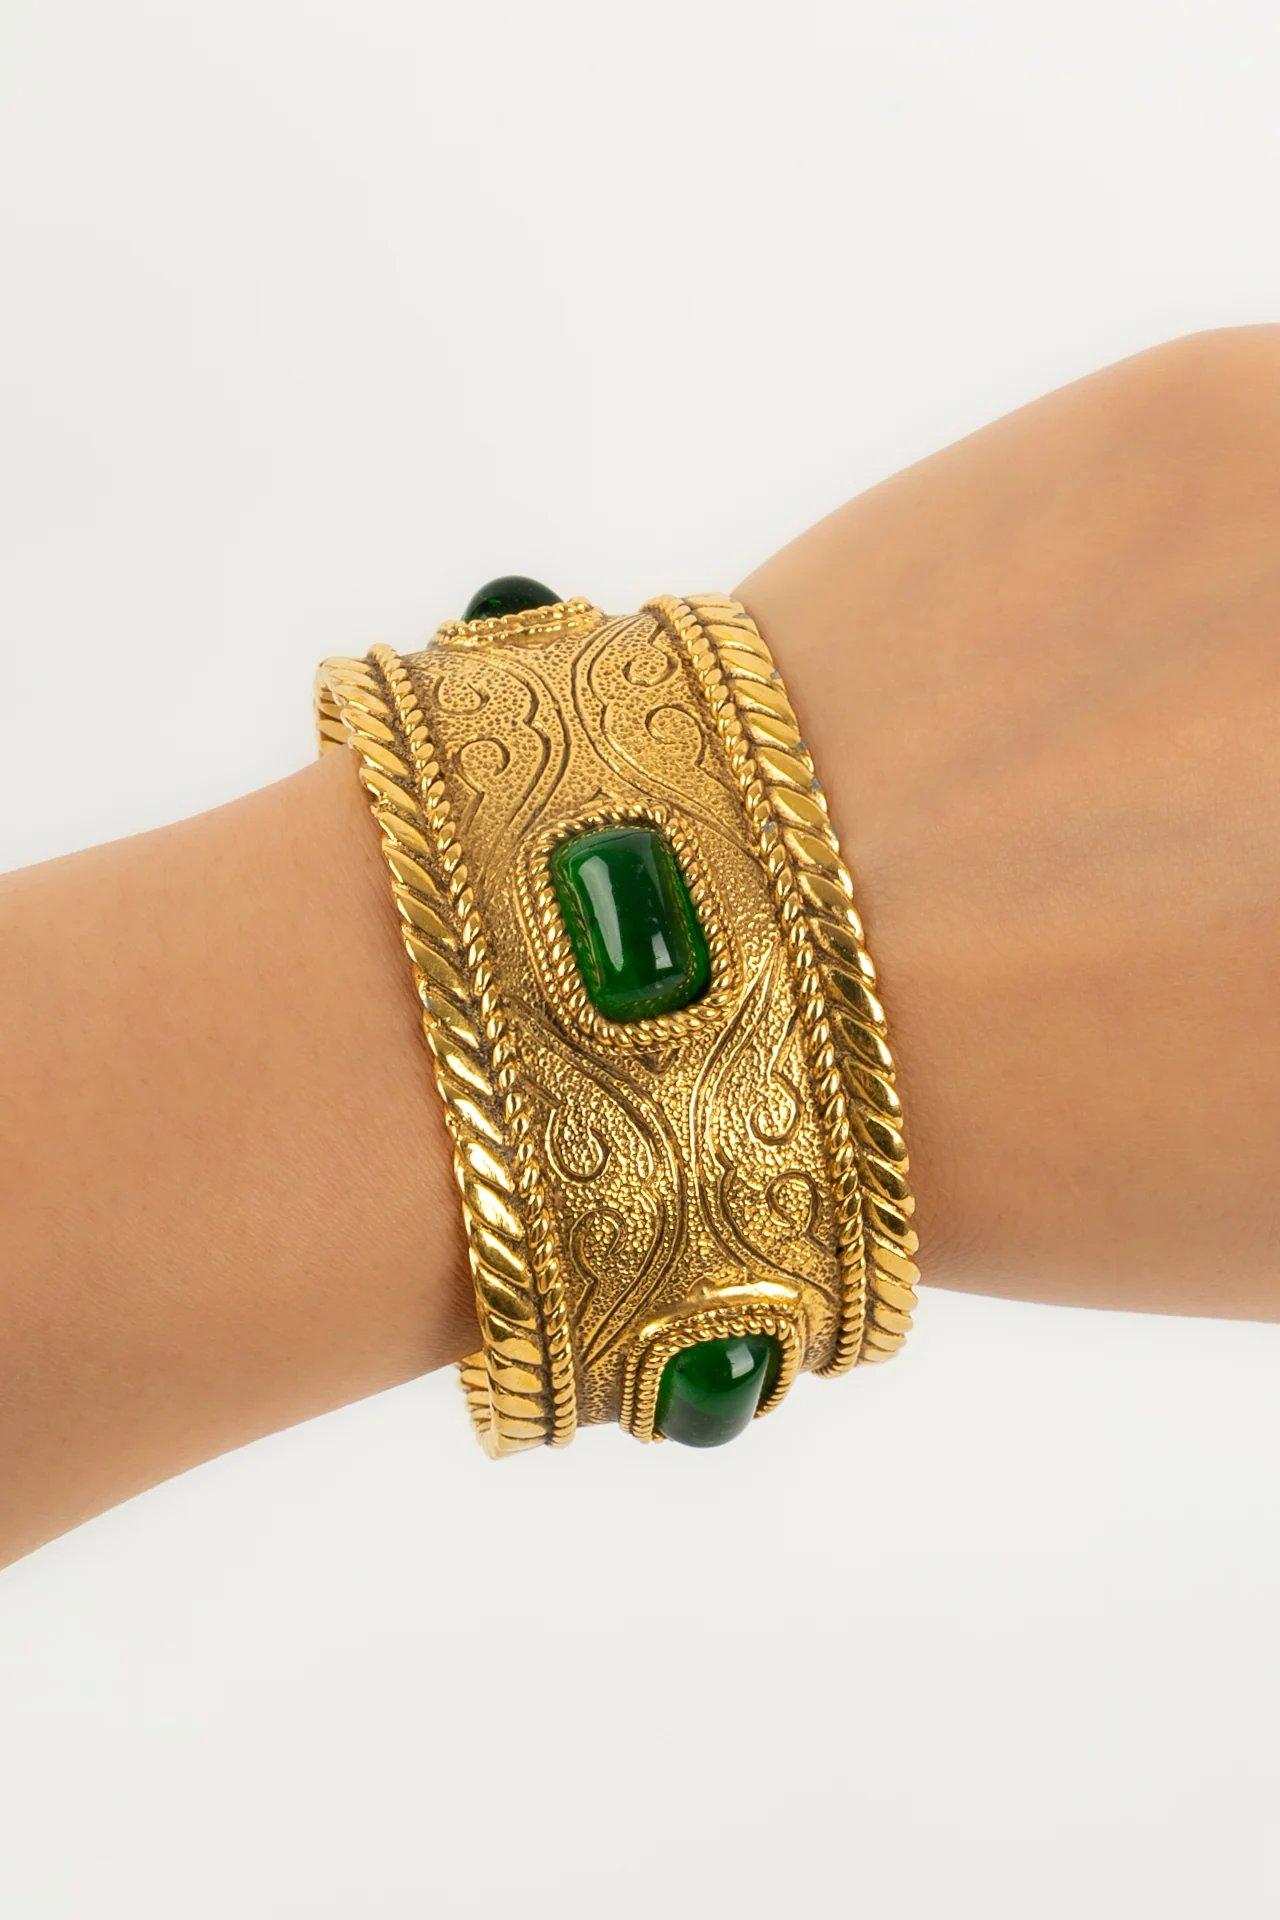 Chanel Byzantine Bracelet in Gilded Metal and Cabochons in Green Glass Paste 5